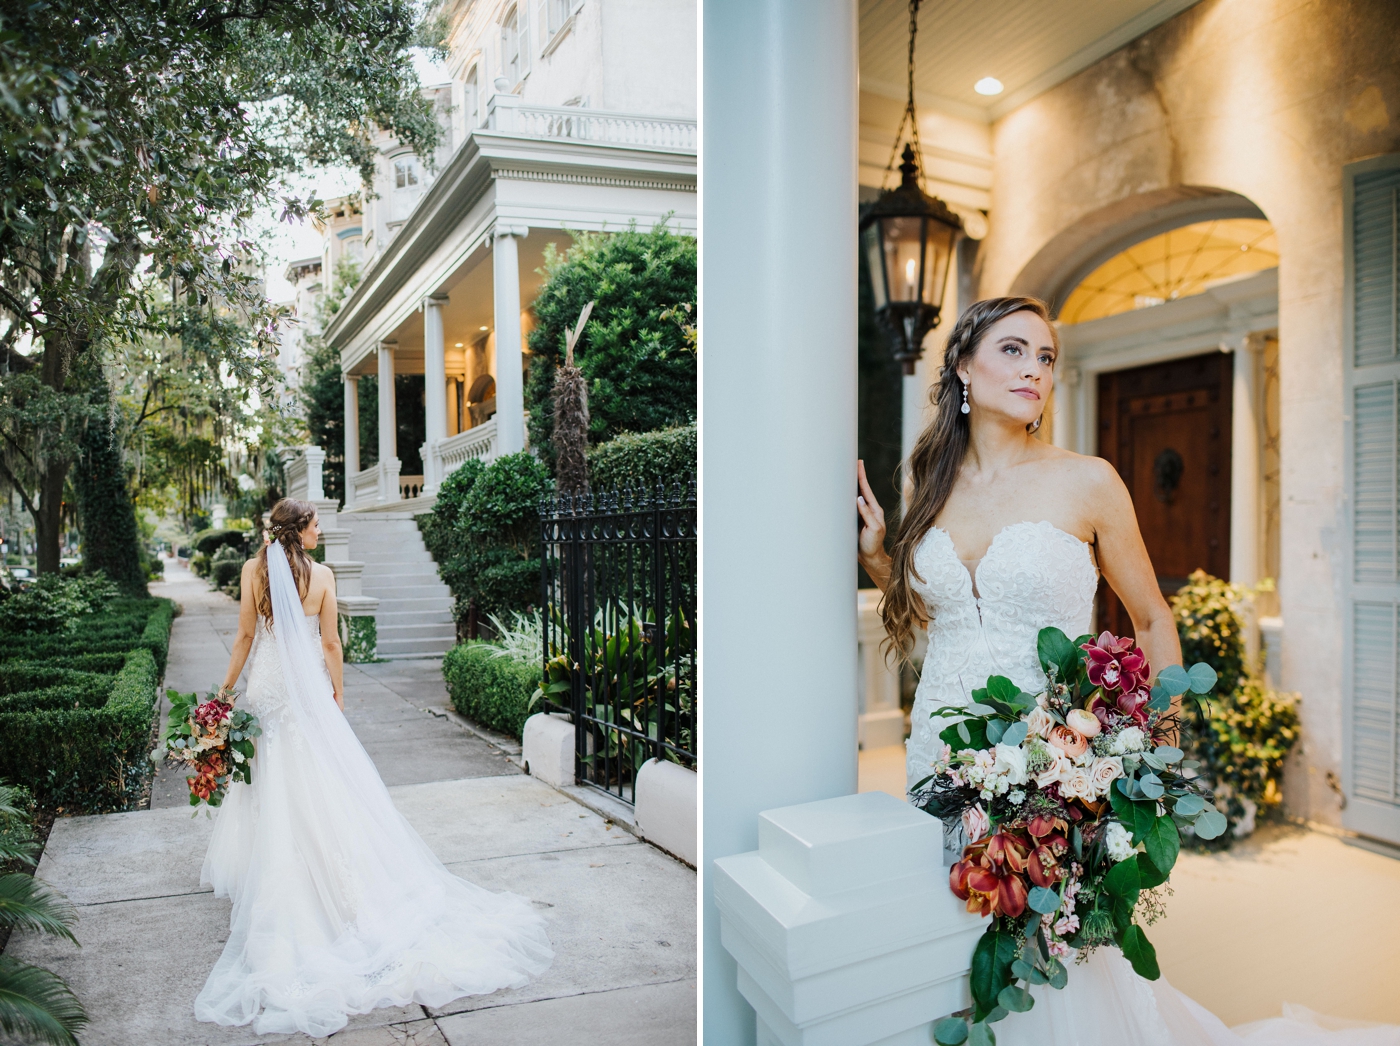 Large bouquet by Ivory and Beau at Ashley’s Bridal Portraits in Downtown Savannah | Izzy and Co.